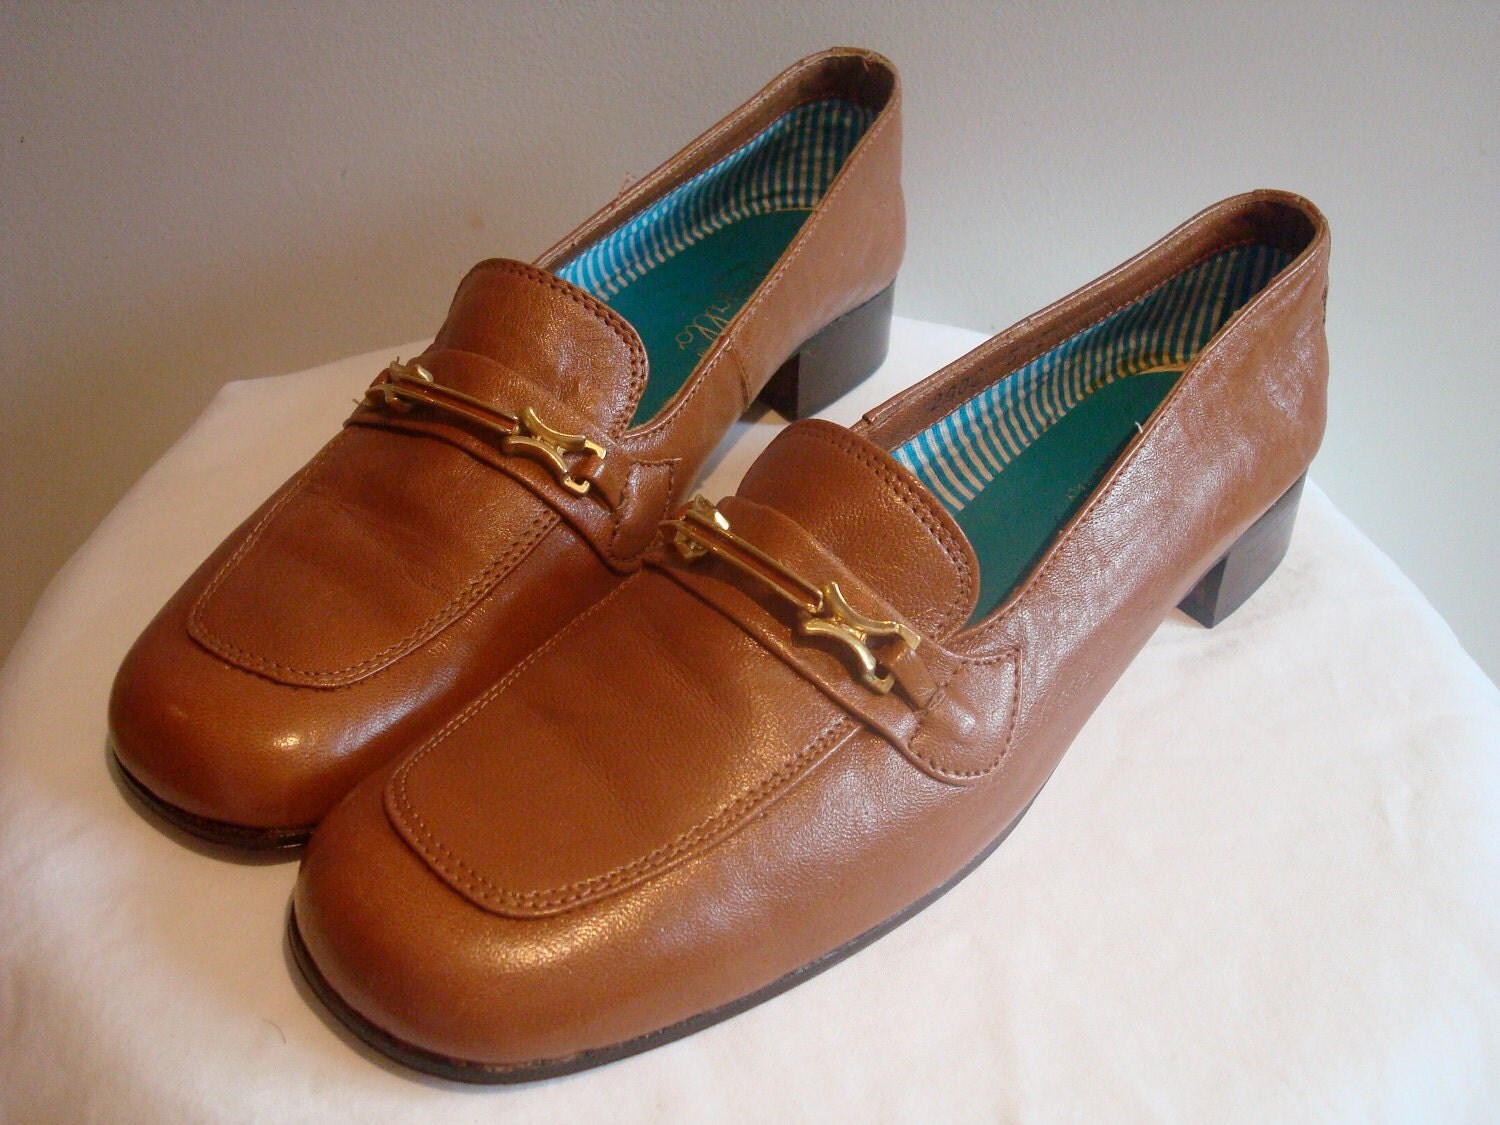 Vintage Womens Shoes Leather Pappagallo Loafers 1970s Tan